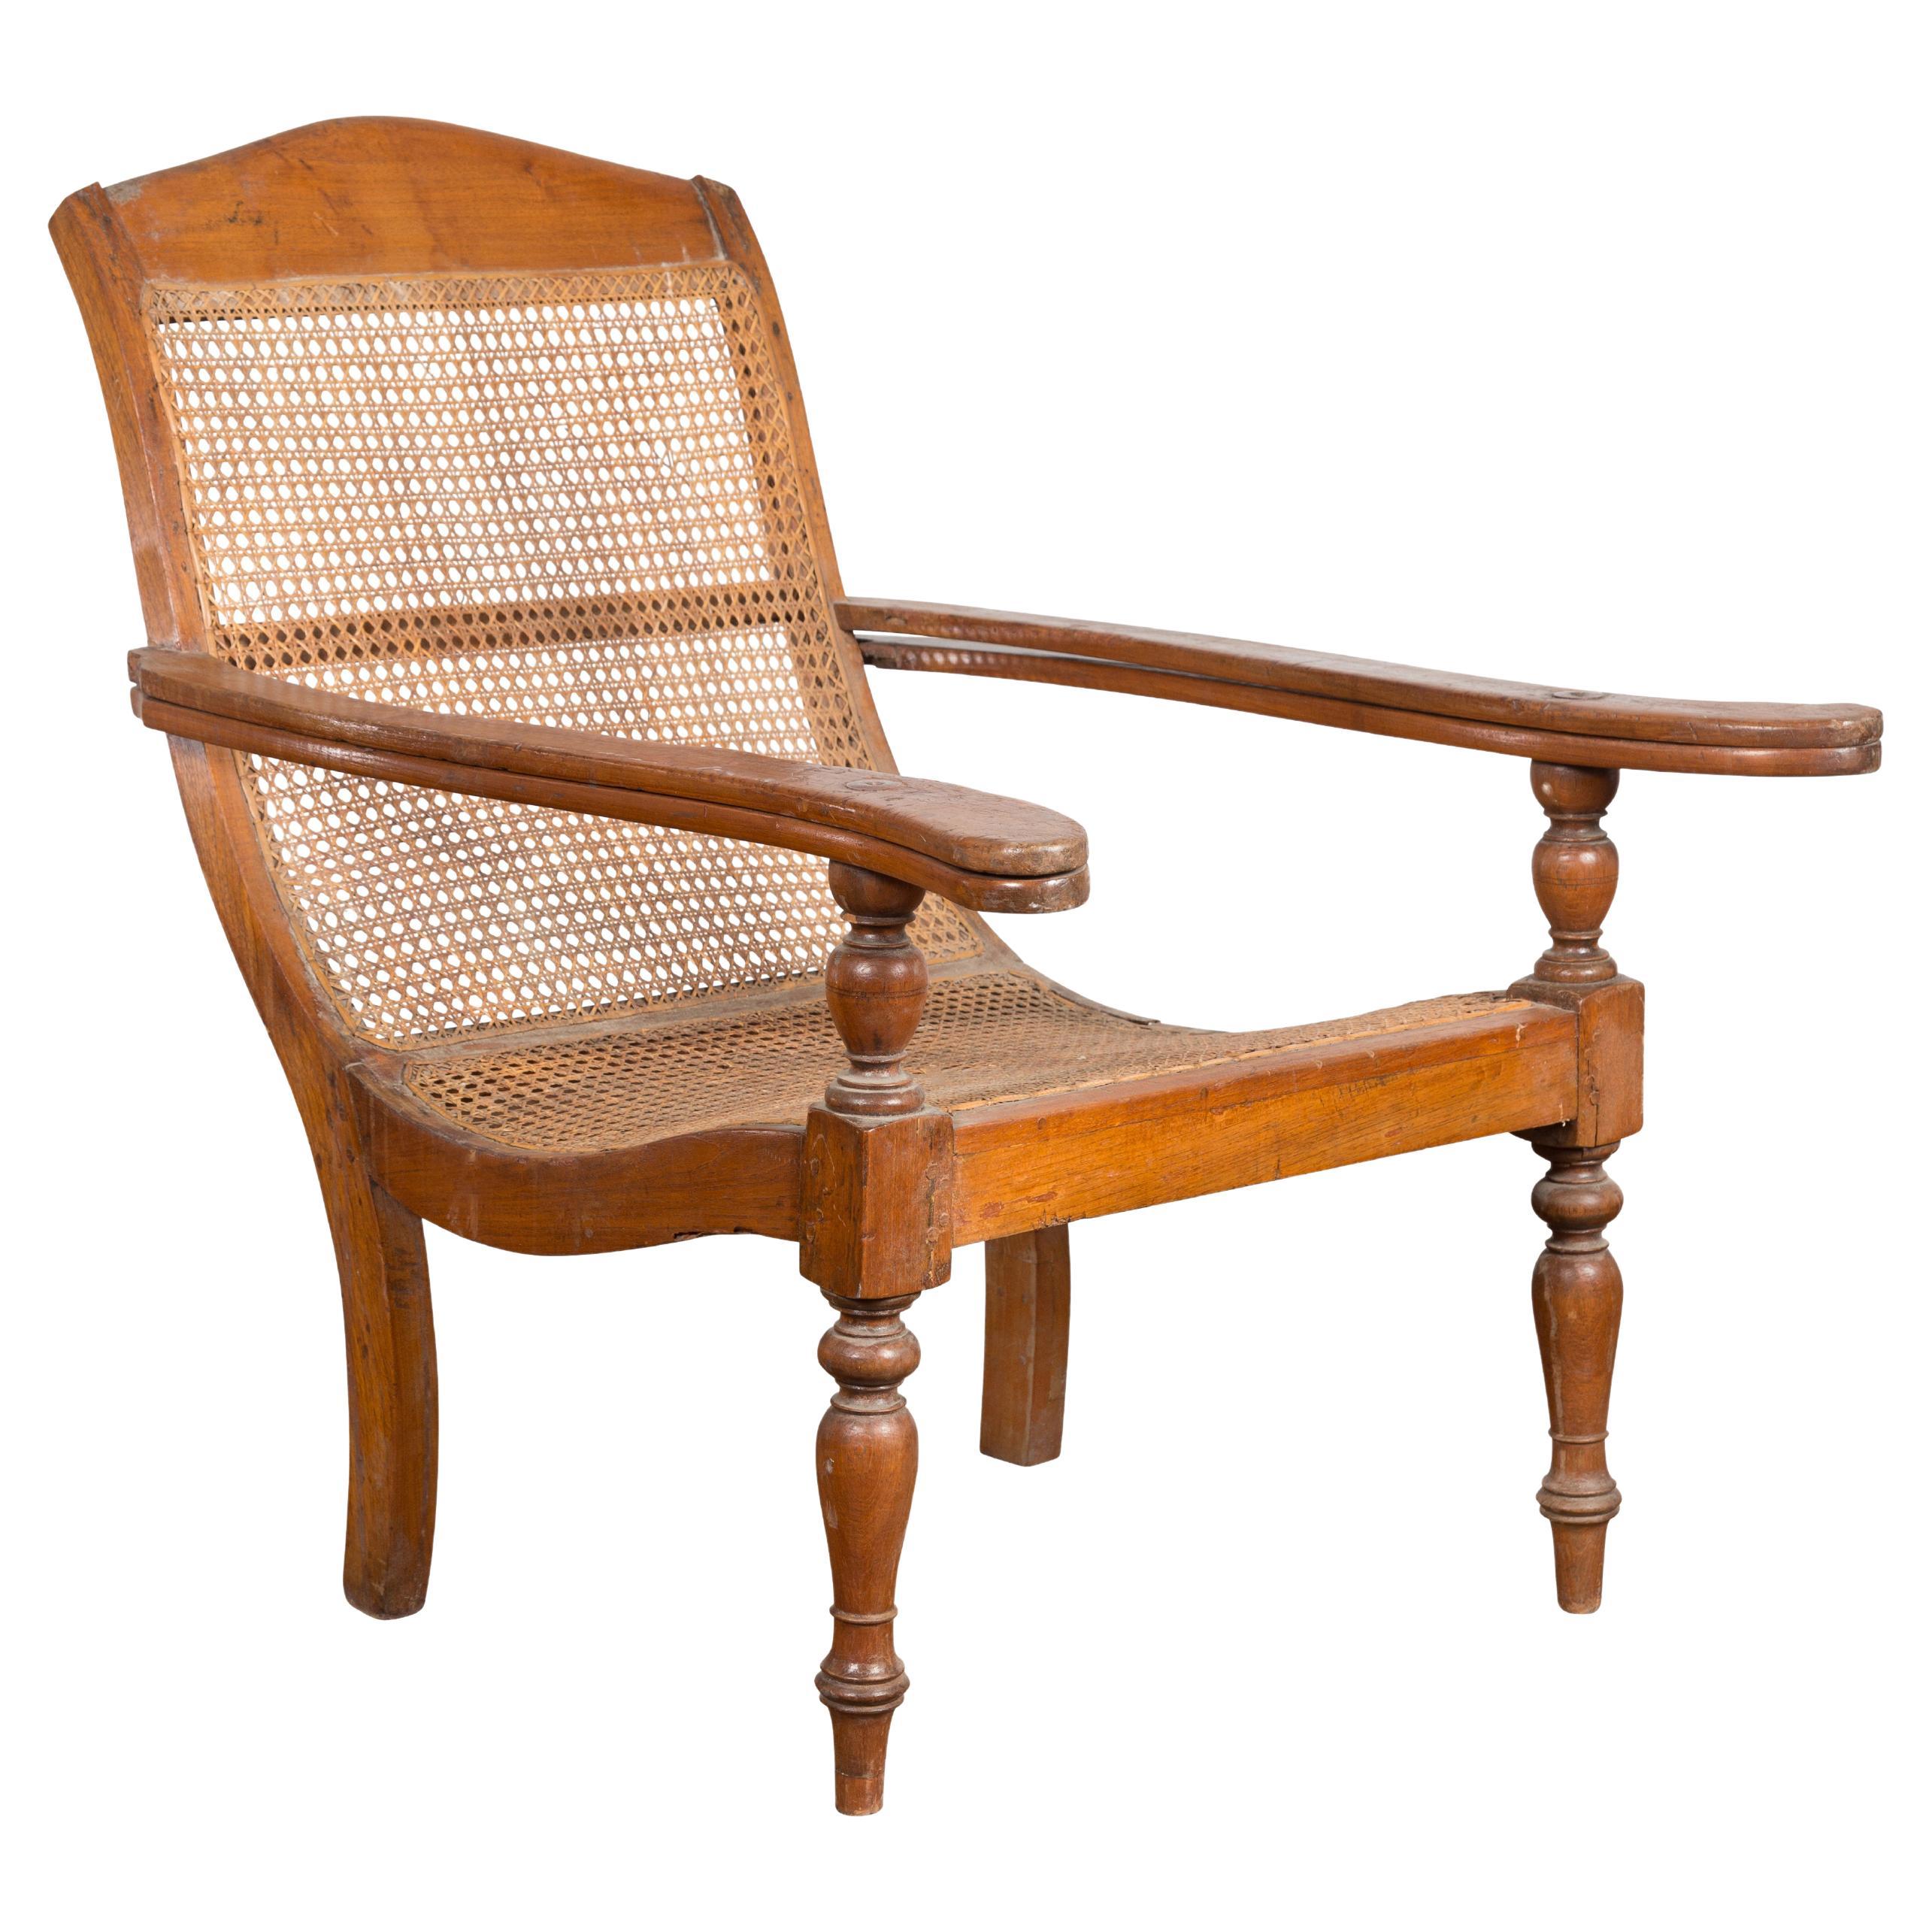 Dutch Colonial Indonesian Cane and Wood Plantation Chair with Extending Arms For Sale